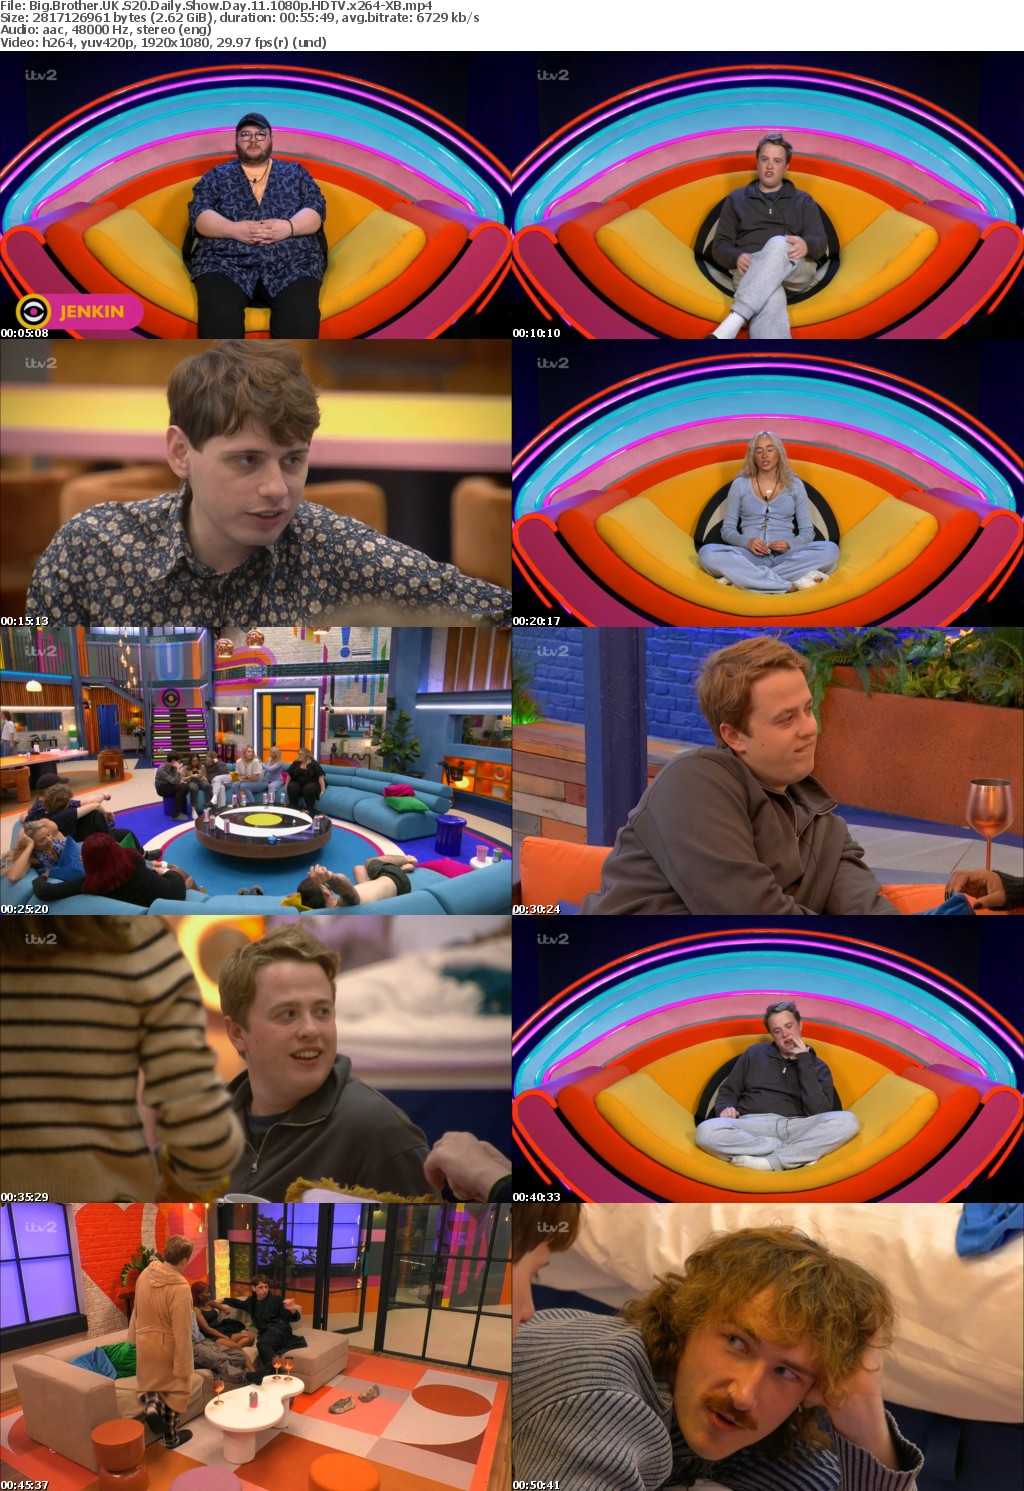 Big Brother UK S20 Daily Show Day 11 1080p HDTV x264-XB